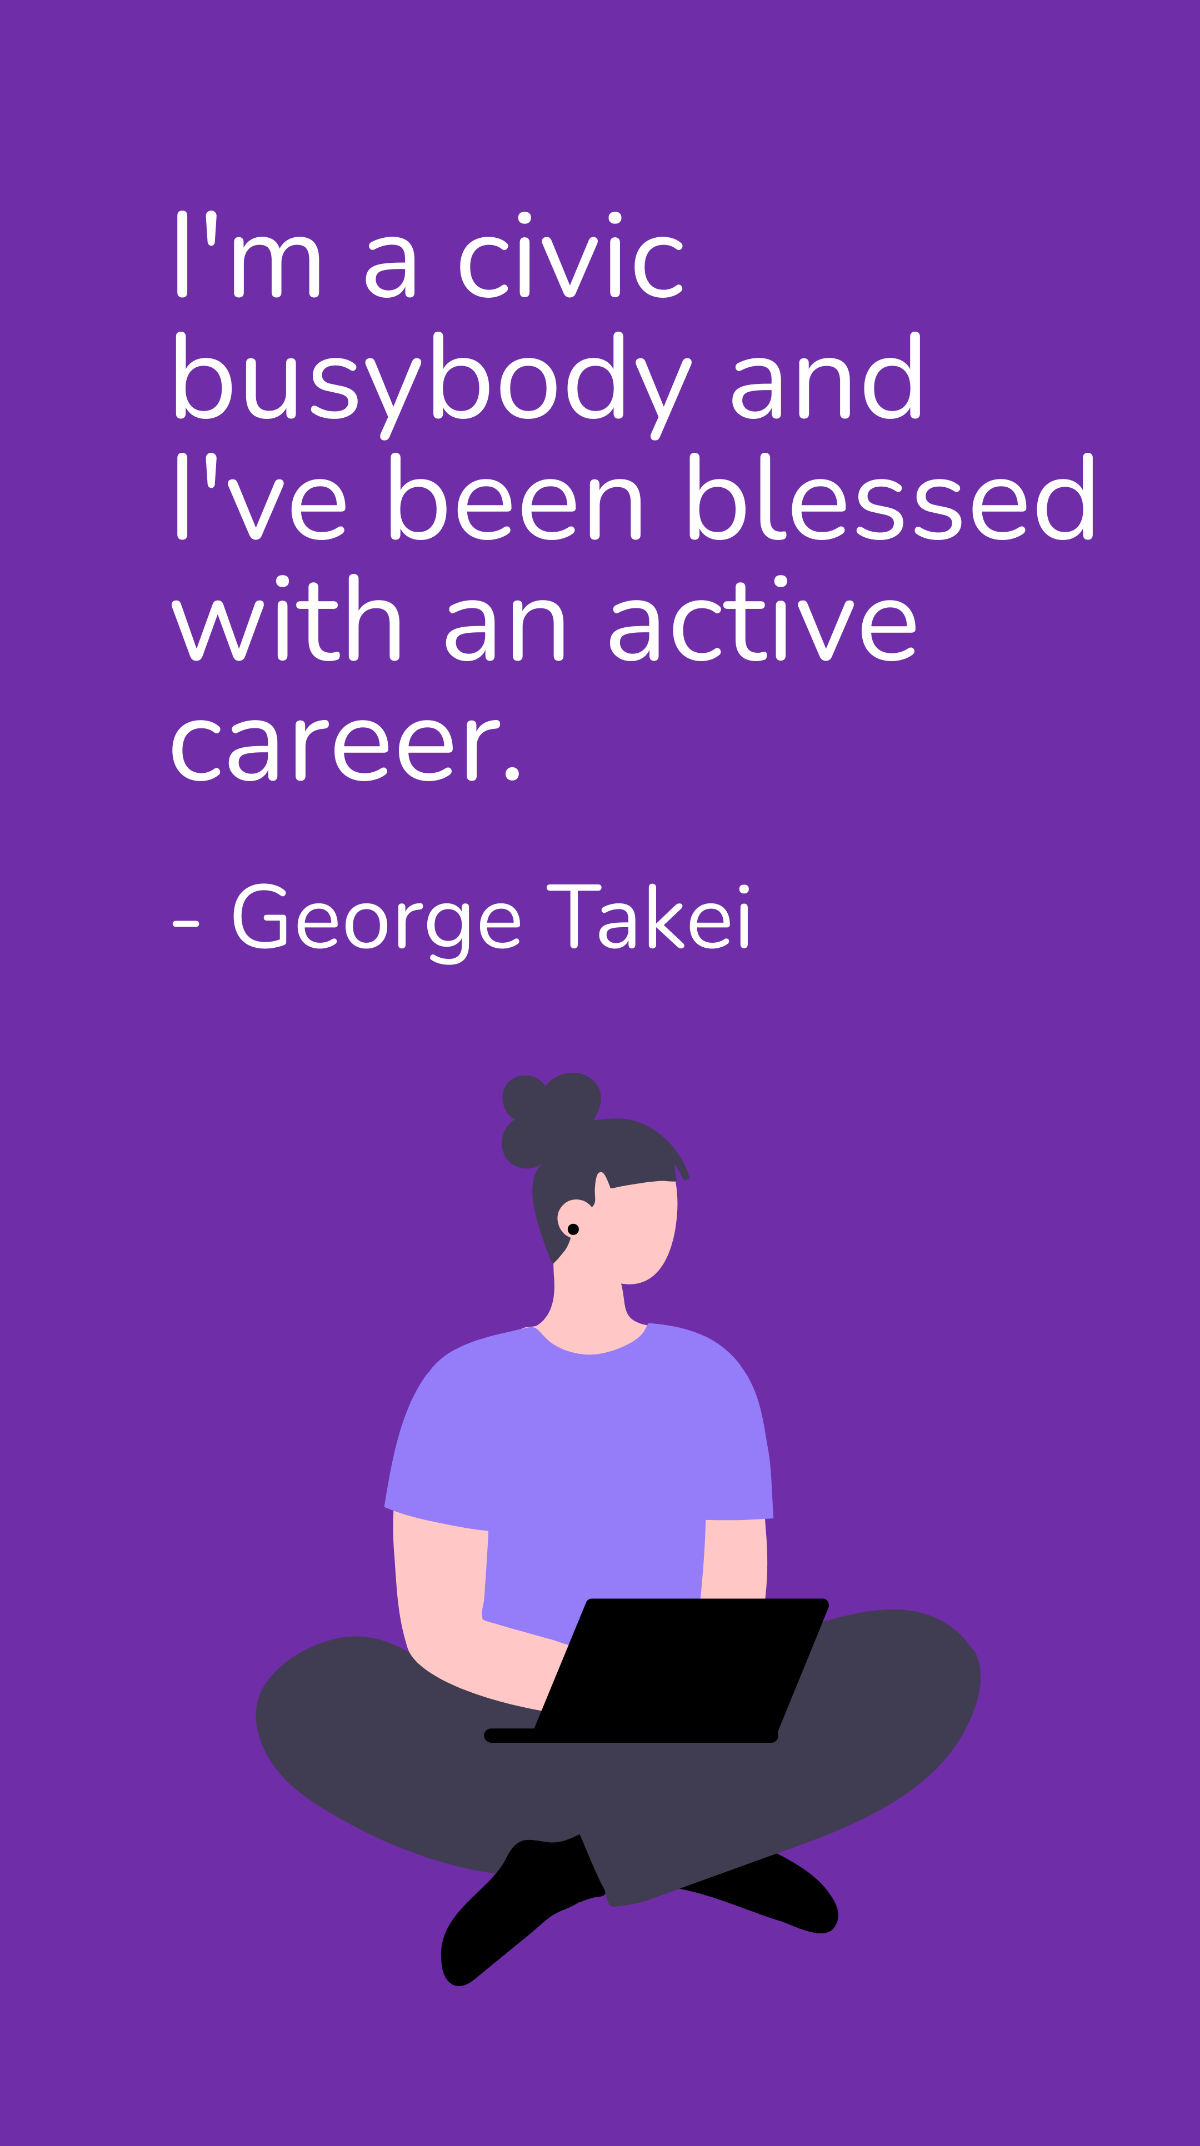 George Takei - I'm a civic busybody and I've been blessed with an active career. Template